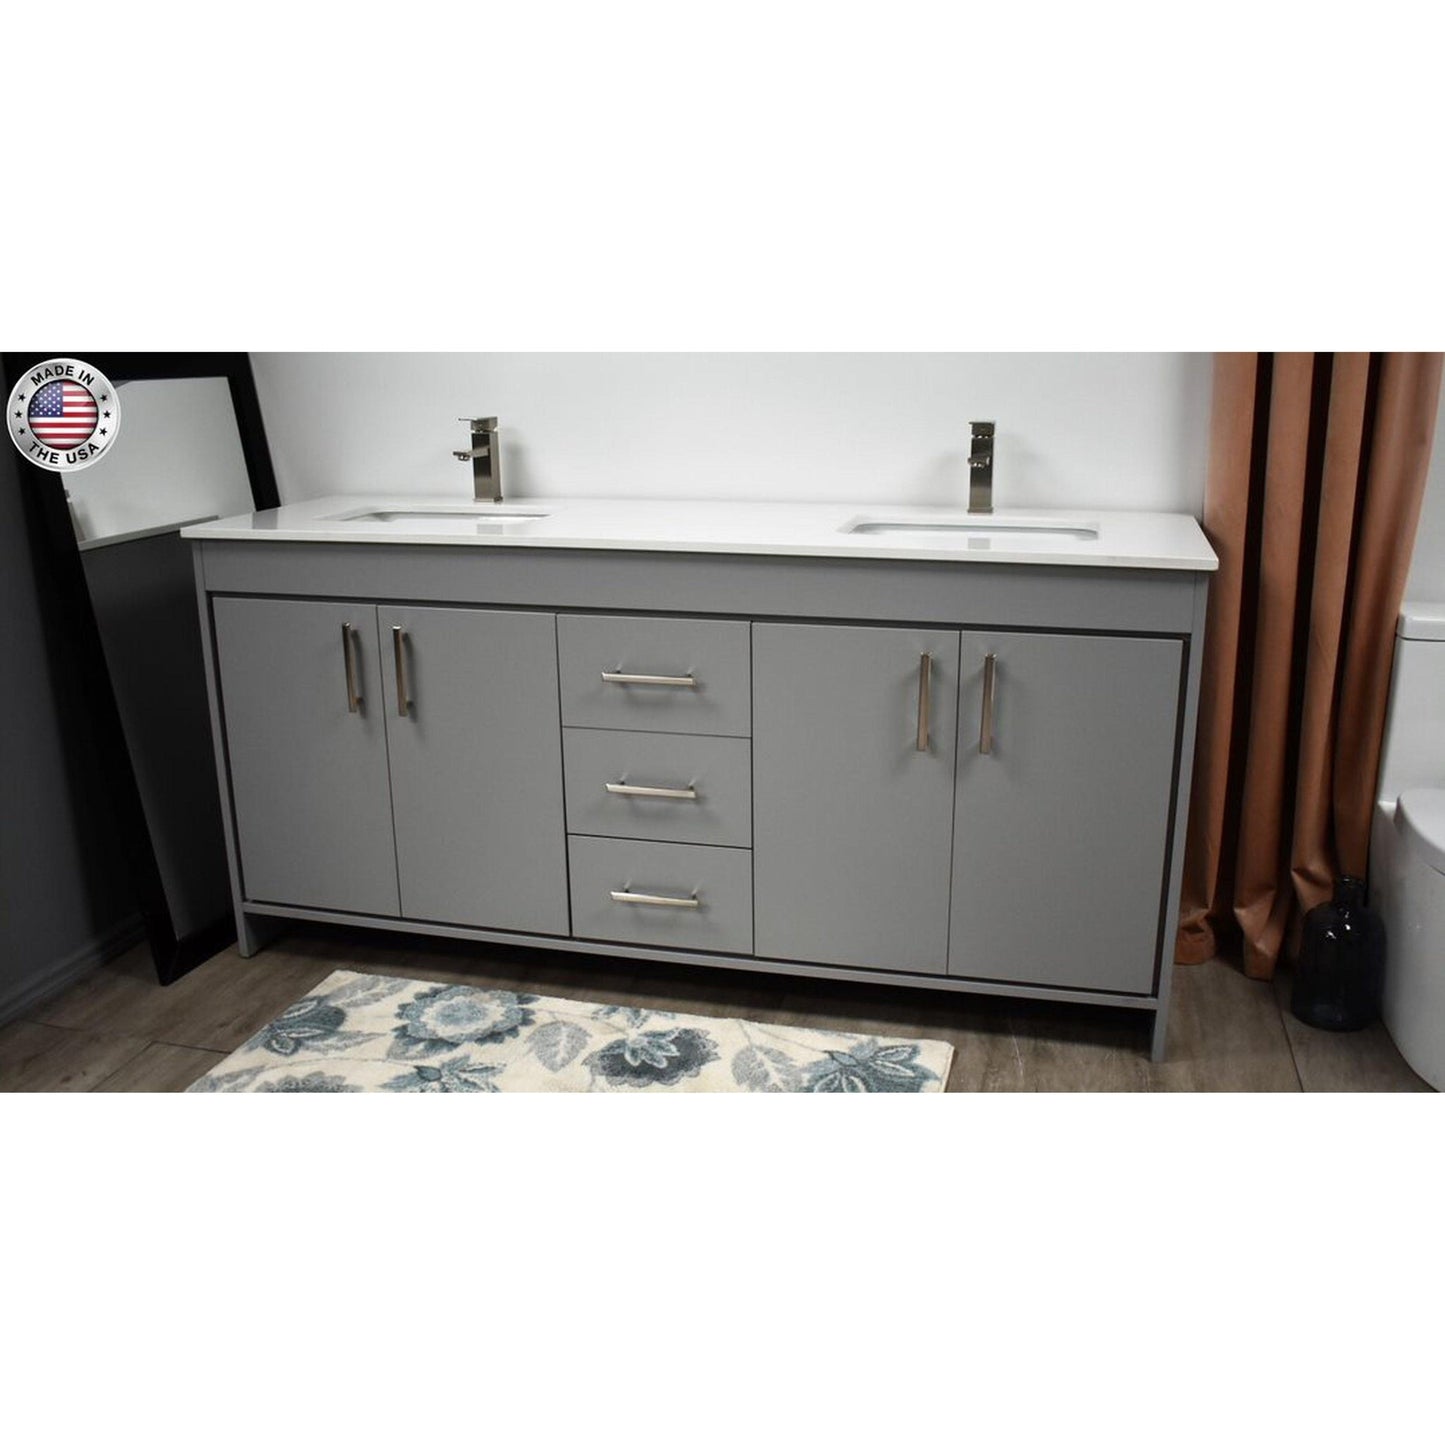 Volpa USA Capri 72" x 22" Gray Freestanding Modern Bathroom Vanity With Undermount Double Sink And White Microstone Top With Brushed Nickel Edge Handles